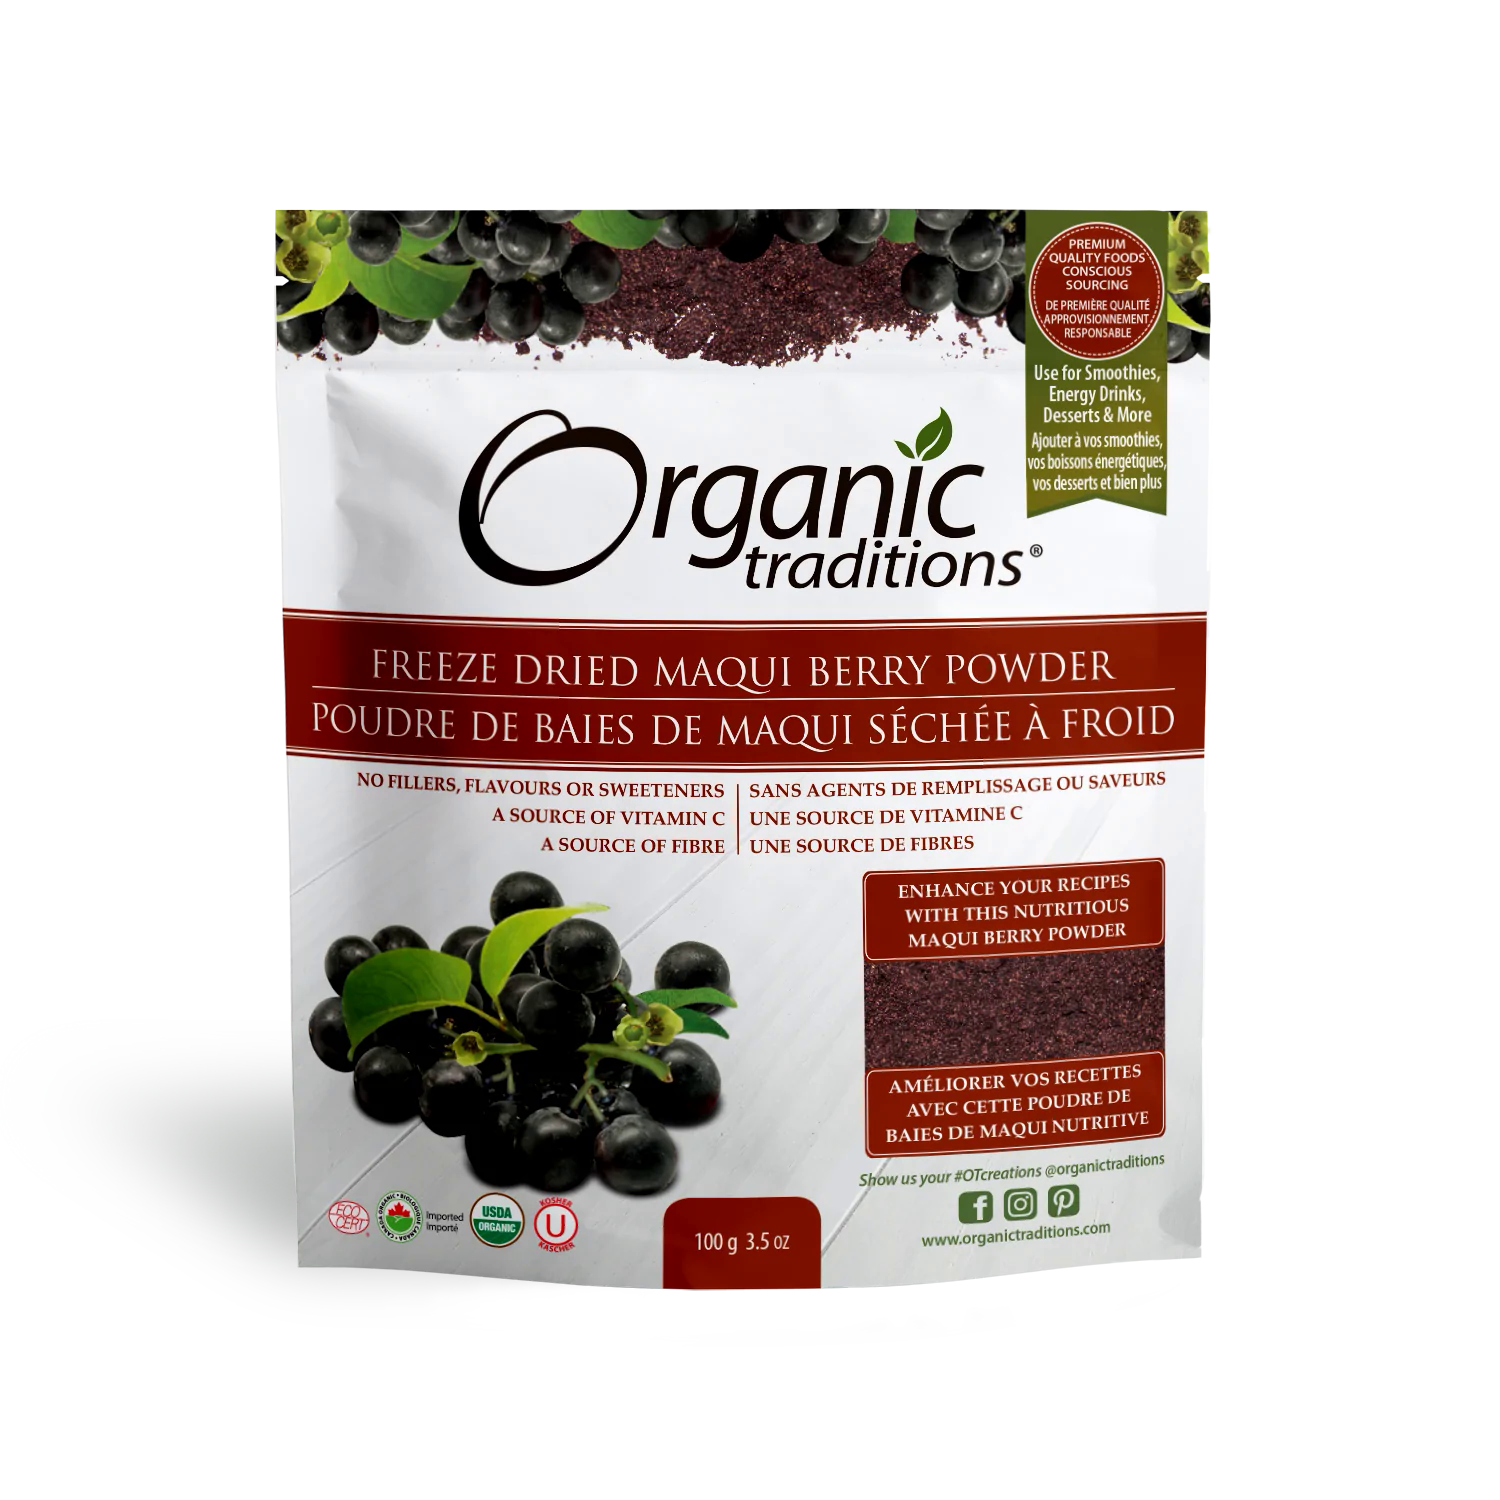 organic-maqui-berry-powder-by-organic-traditions-canadian-front-of-bag-image